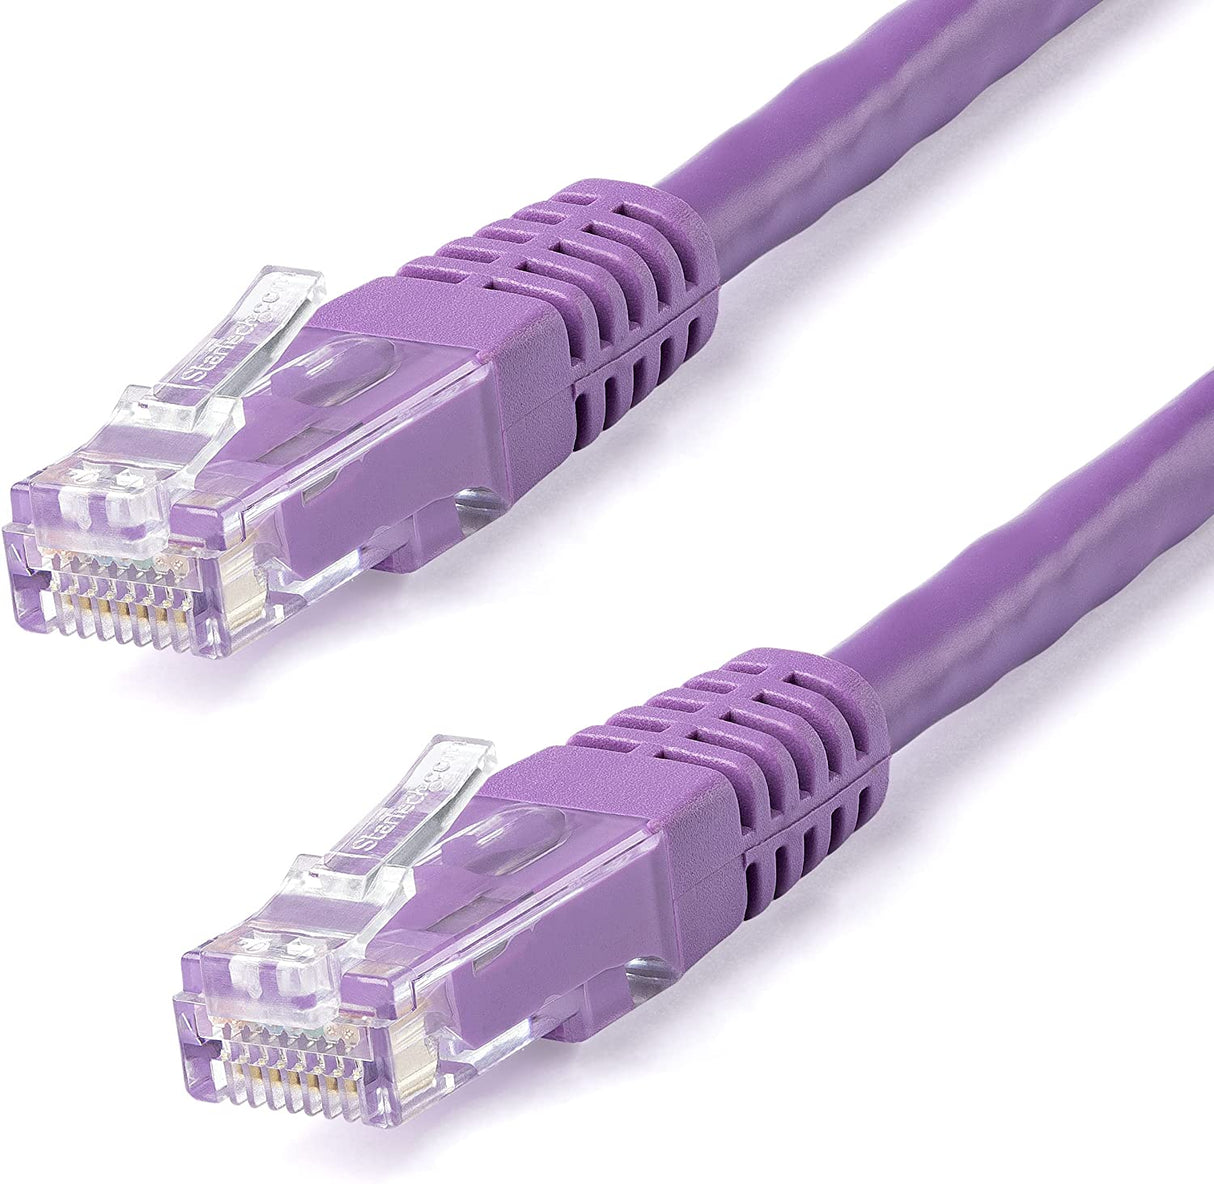 StarTech.com 6ft CAT6 Ethernet Cable - Purple CAT 6 Gigabit Ethernet Wire -650MHz 100W PoE++ RJ45 UTP Molded Category 6 Network/Patch Cord w/Strain Relief/Fluke Tested UL/TIA Certified (C6PATCH6PL) Purple 6 ft / 1.82 m 1 Pack